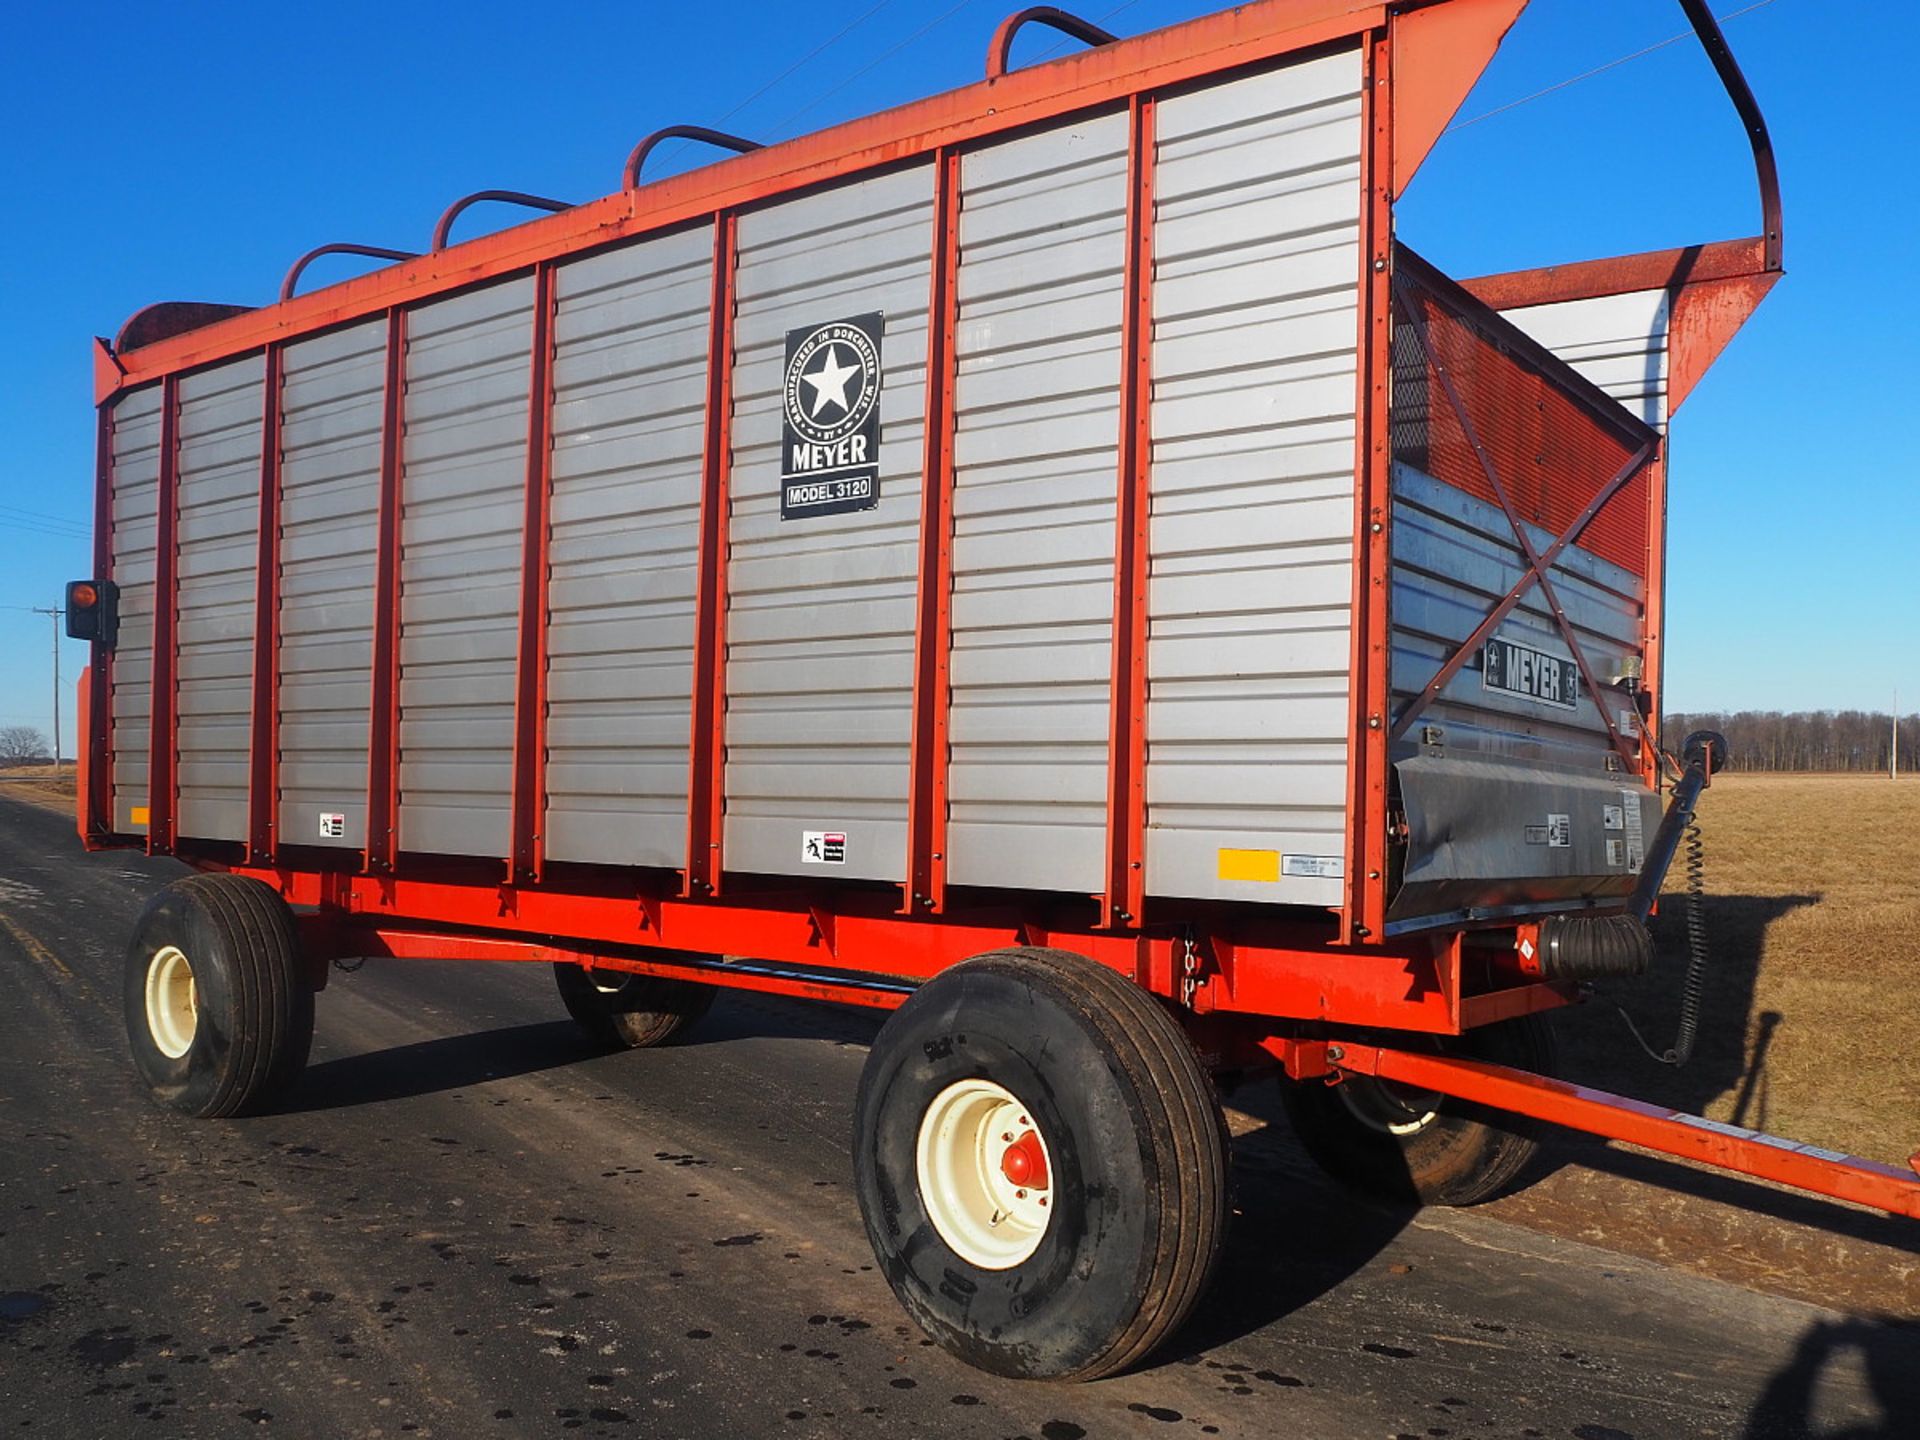 MEYER 3120 REAR UNLOAD FORAGE WAGON - Image 2 of 9